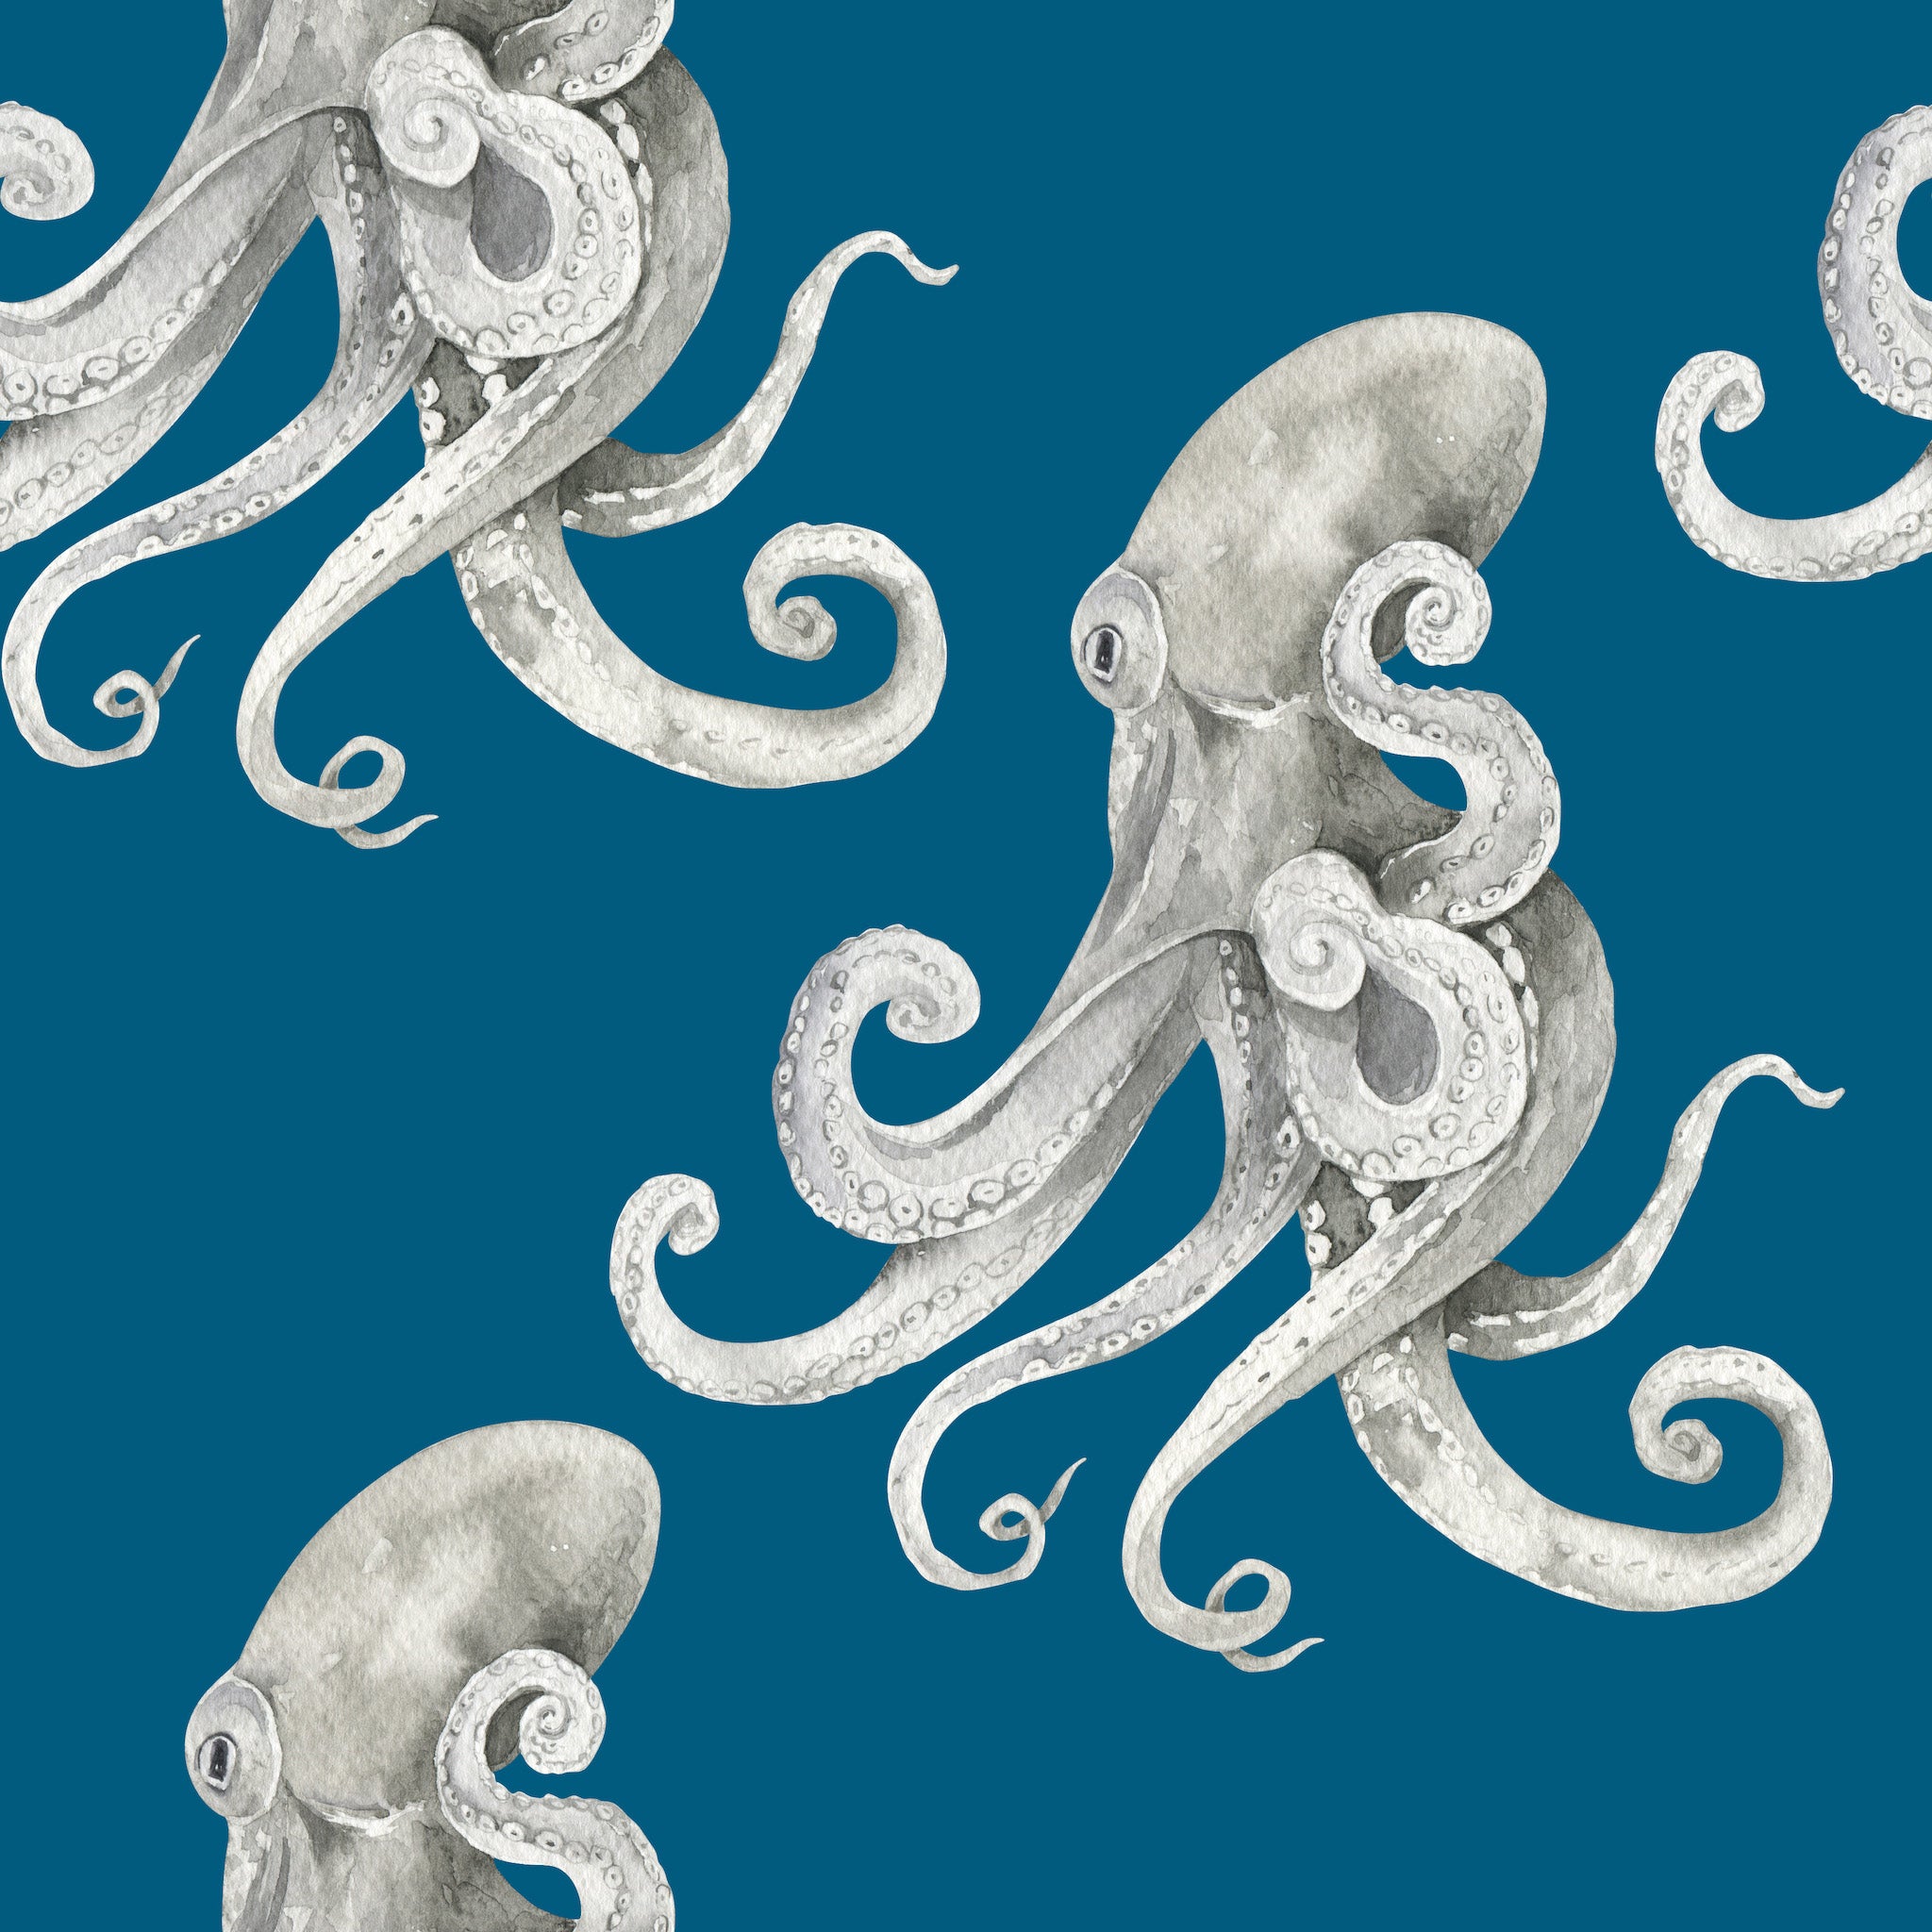 Download Octopus wallpapers for mobile phone free Octopus HD pictures